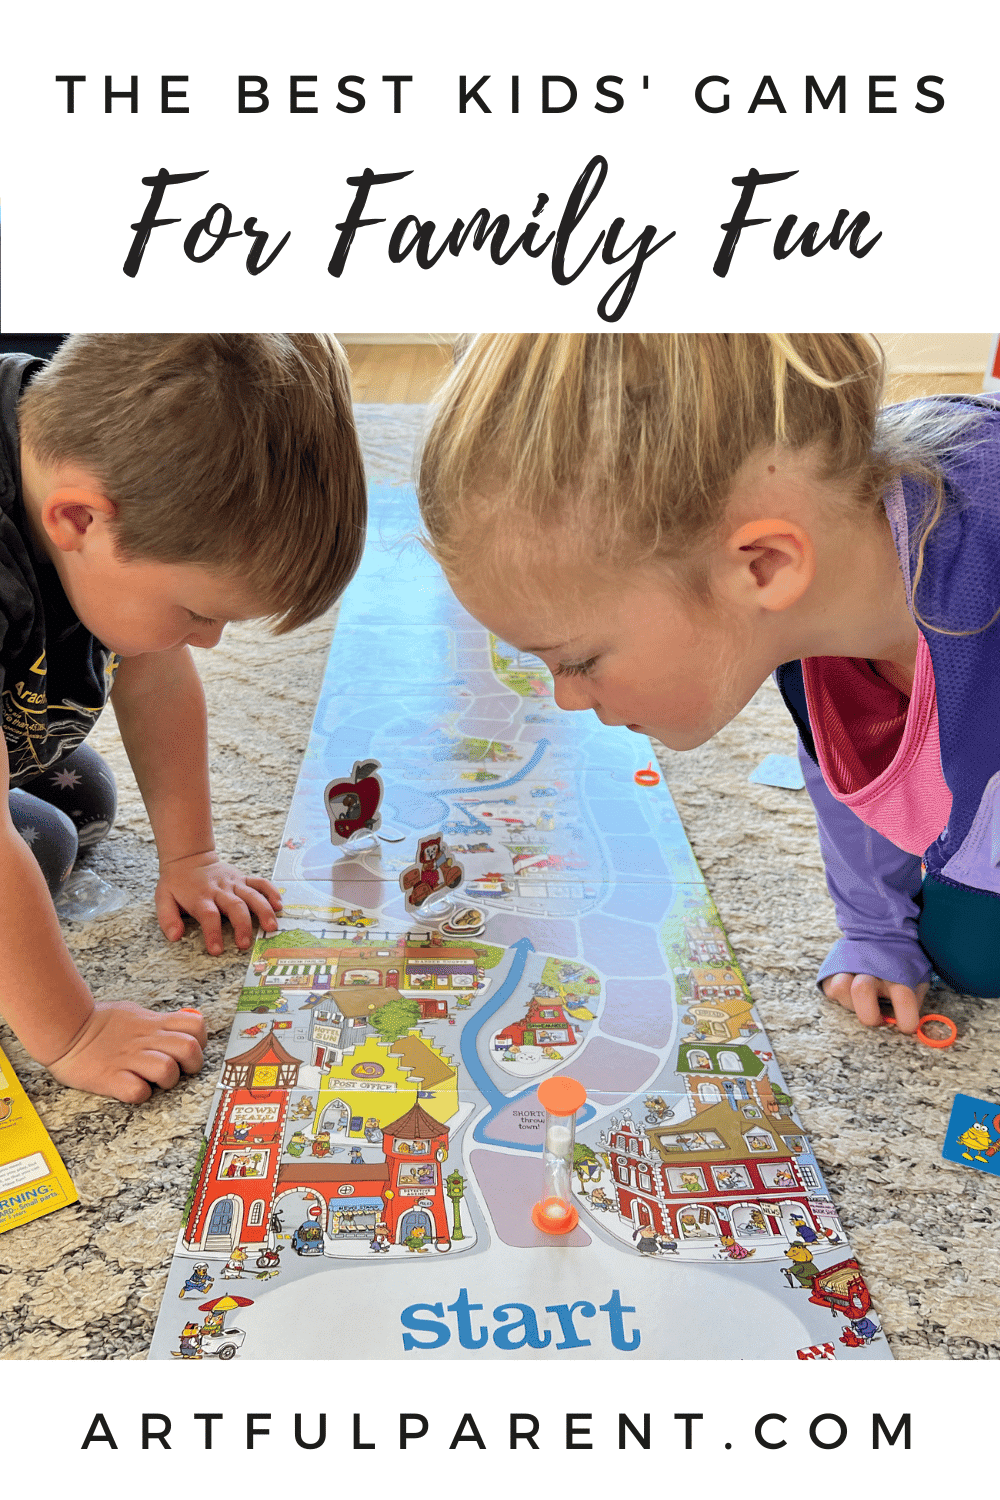 The Best Kids Games for Family Fun, Connection, & Learning